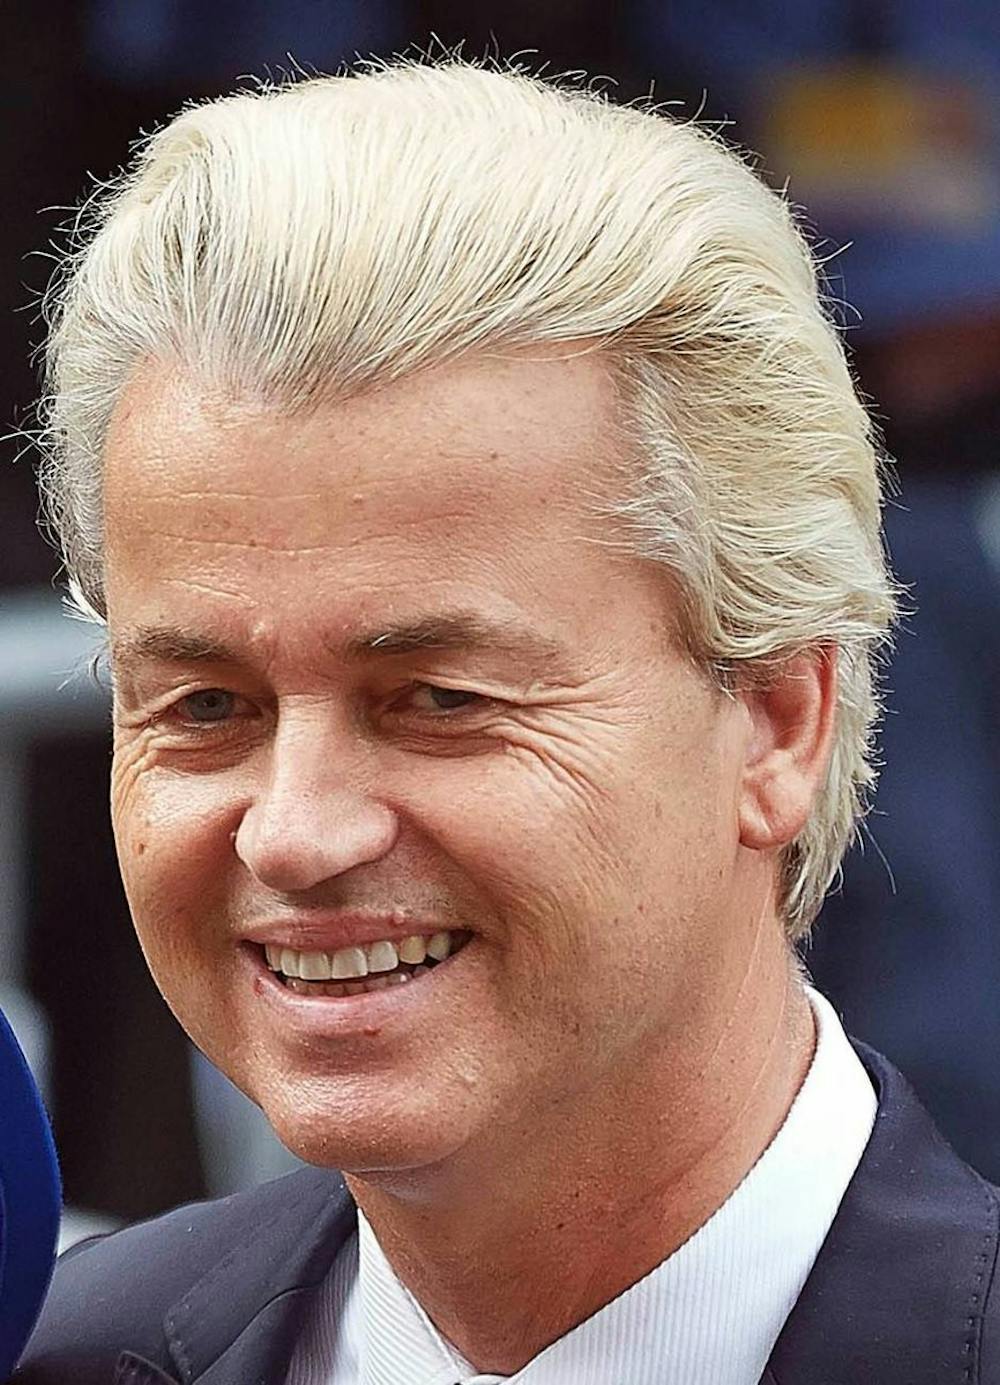 <p><em>Over the past few weeks, the Netherlands shockingly observed its far-right party gaining the most seats through snap elections for the House of Representatives in order to elect a new prime minister (Photo courtesy of Wikimedia Commons/“</em><a href="https://commons.wikimedia.org/wiki/File:Geert_Wilders_op_Prinsjesdag_2014_(cropped2).jpg" target=""><em>Geert Wilders op Prinsjesdag 2014 (cropped2)</em></a><em>” by Rijksoverheid/Phil Nijhuis. CC-Zero. September 16, 2014). </em></p>